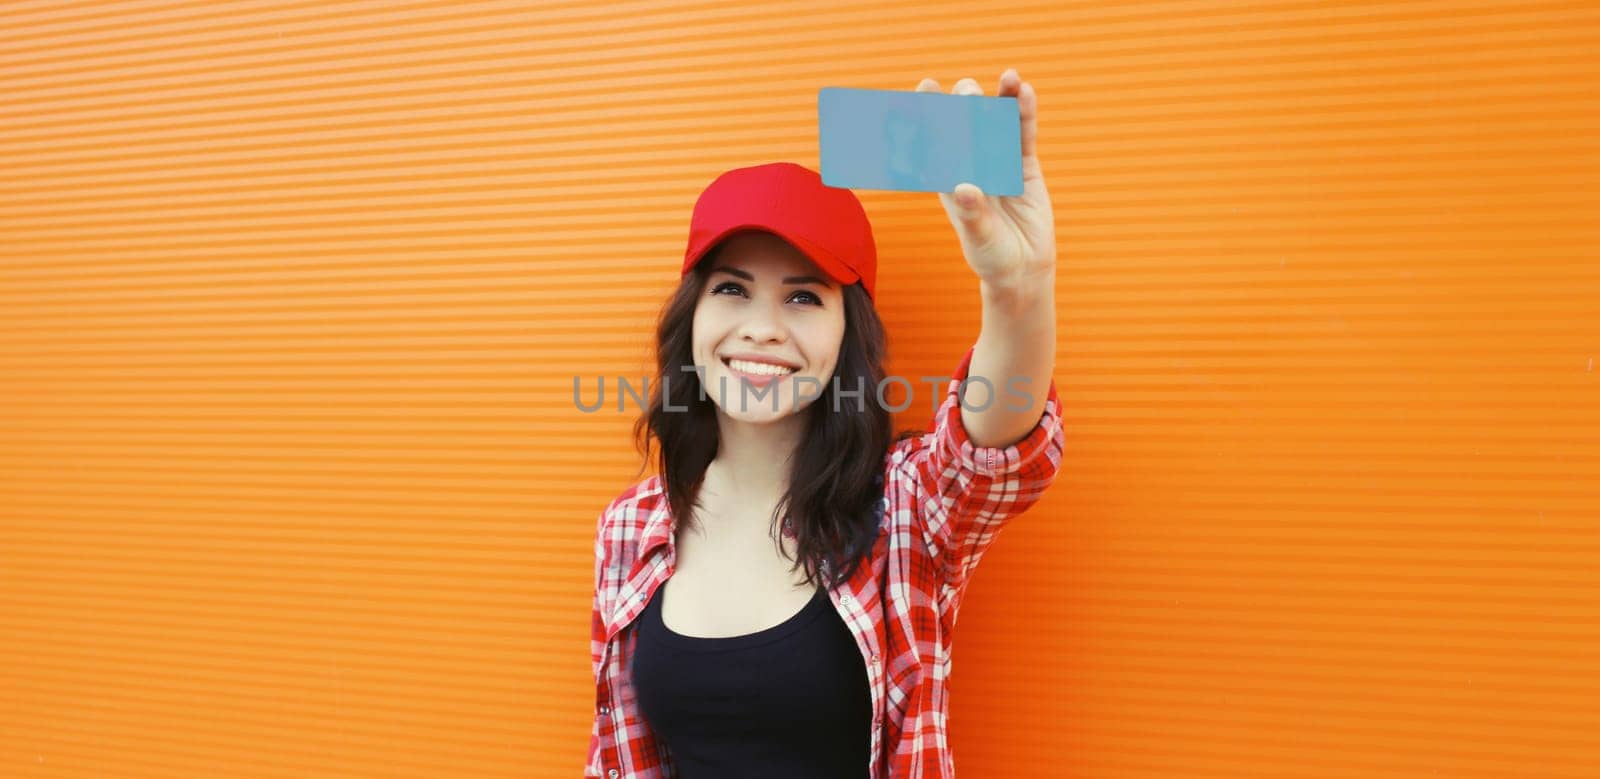 Happy cheerful smiling young woman taking selfie with mobile phone on colorful orange background by Rohappy